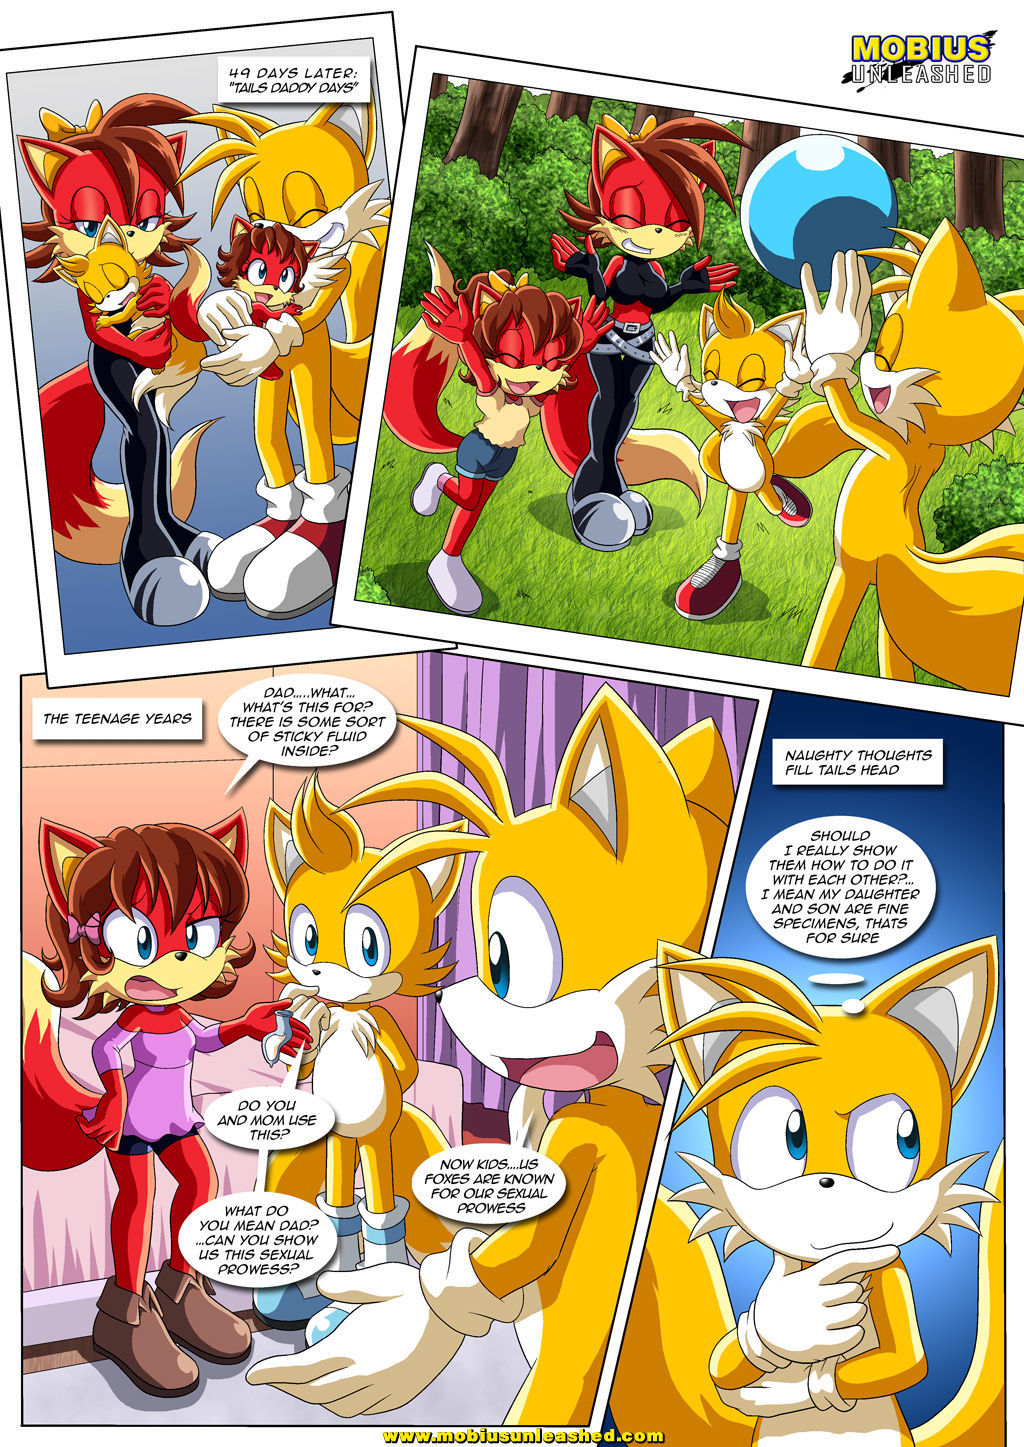 The Prower Family Affair (Sonic The Hedgehog) by Palcomix page 6